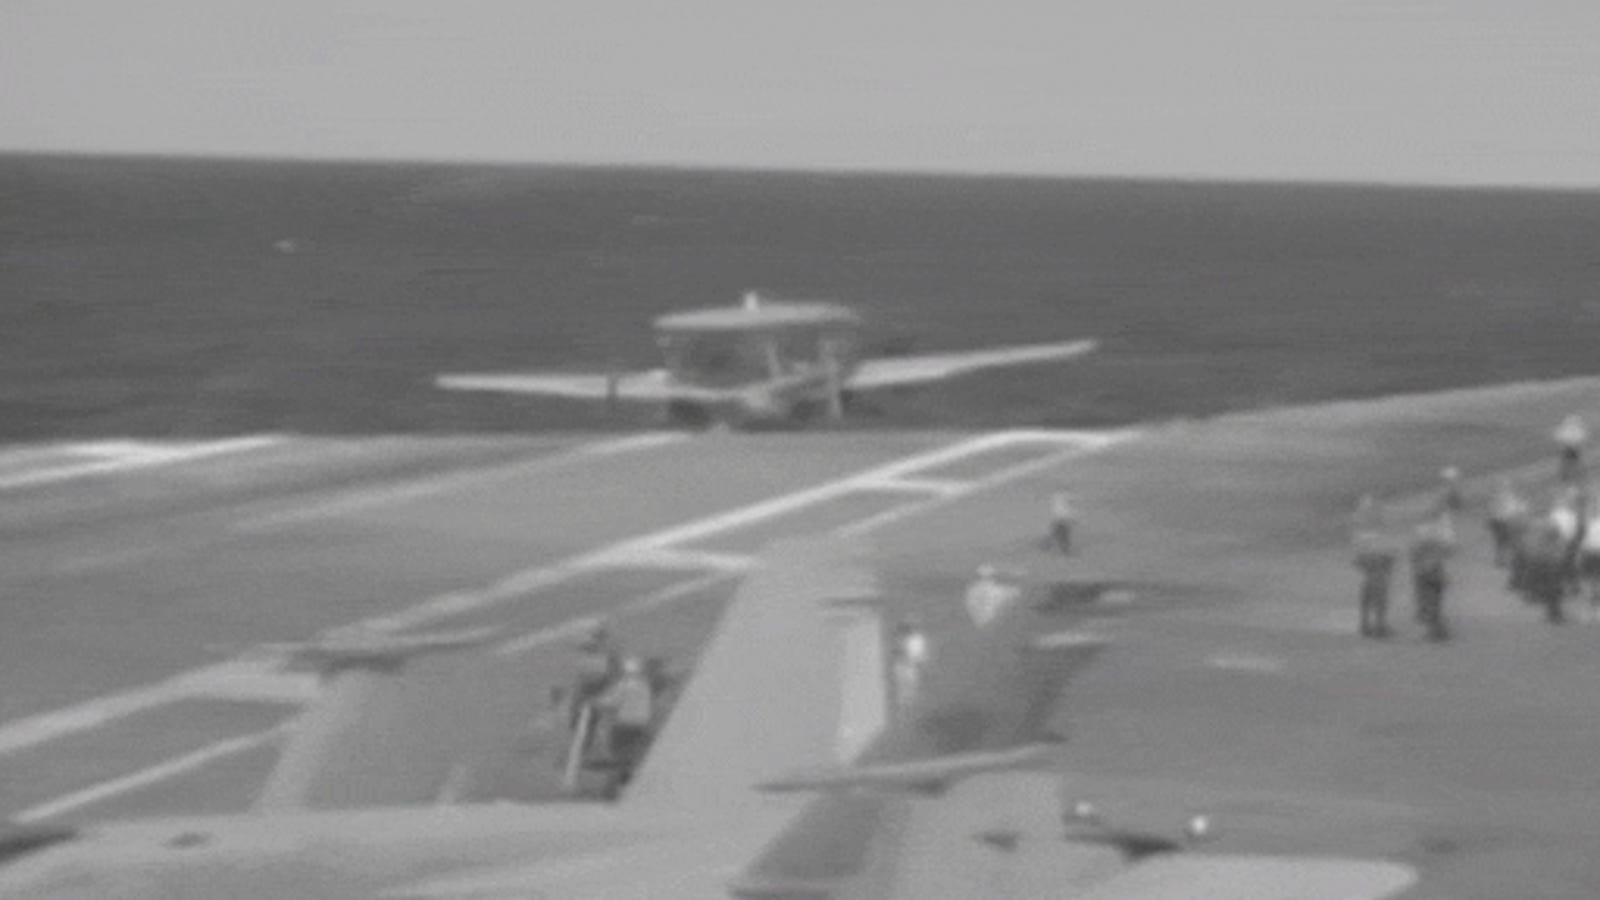 Watch a Plane Fall Off an Aircraft Carrier After a Cable Suddenly Snaps